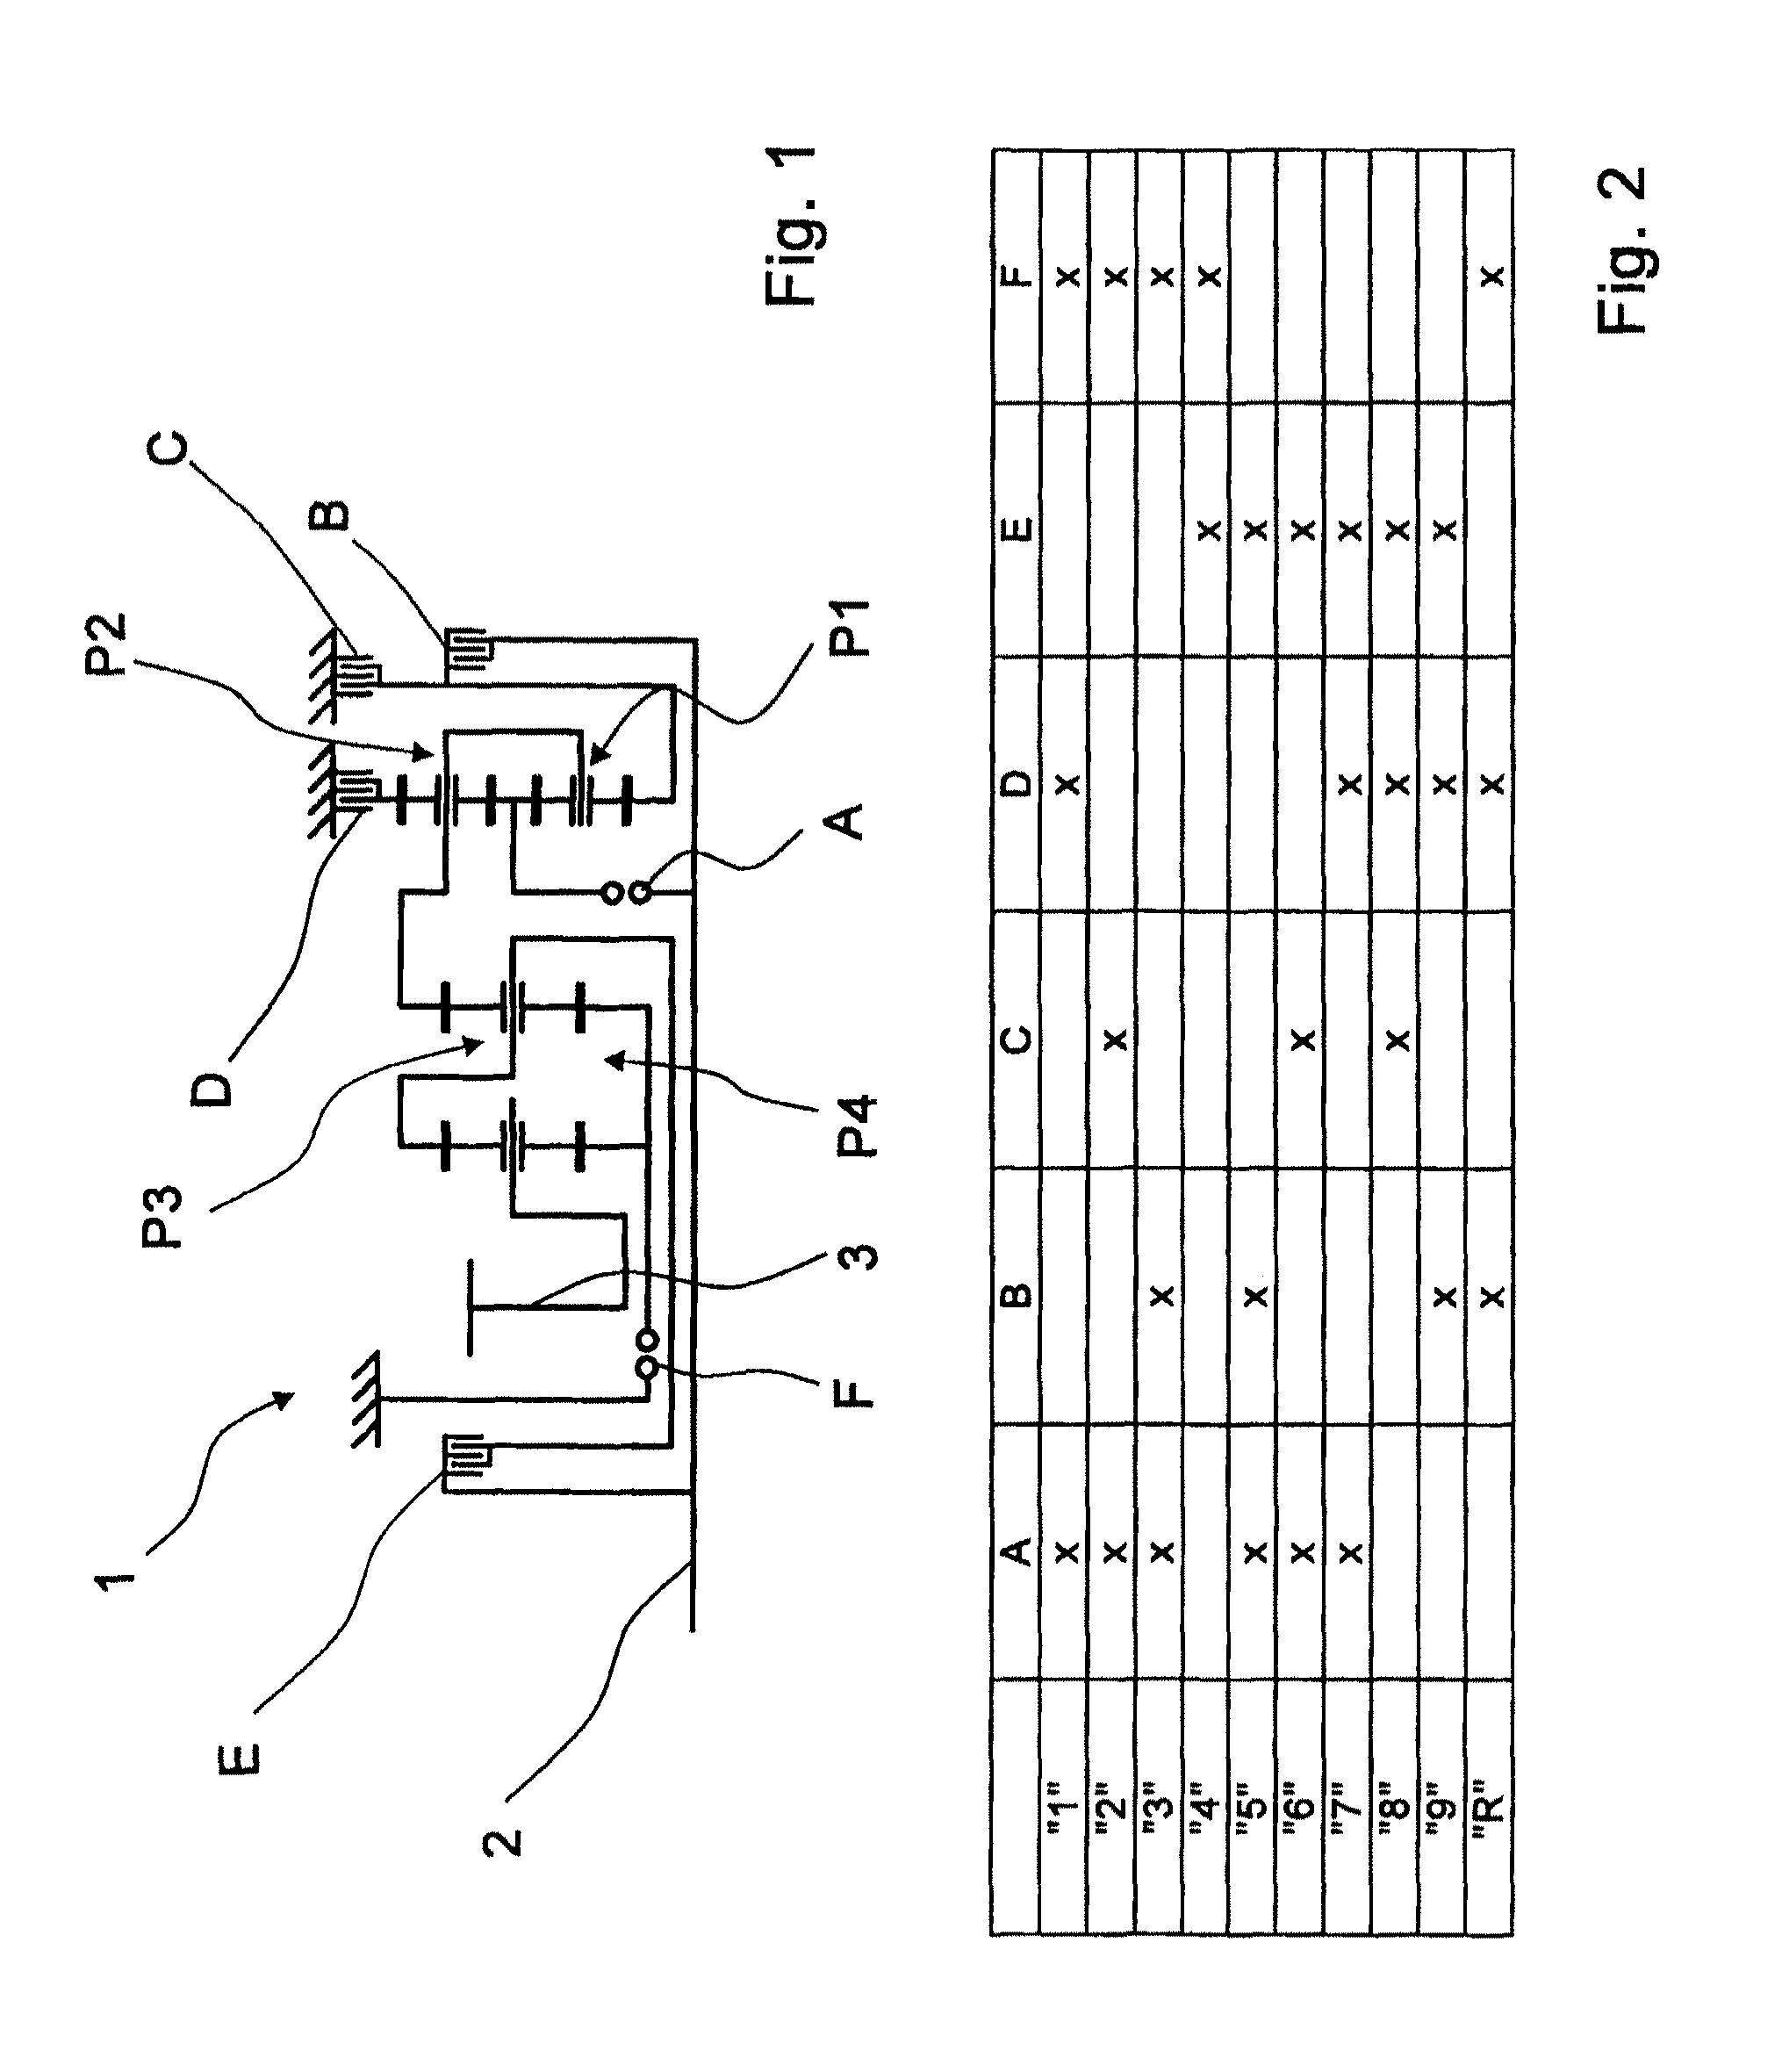 Method for operating a transmission with at least one positive-locking shifting element